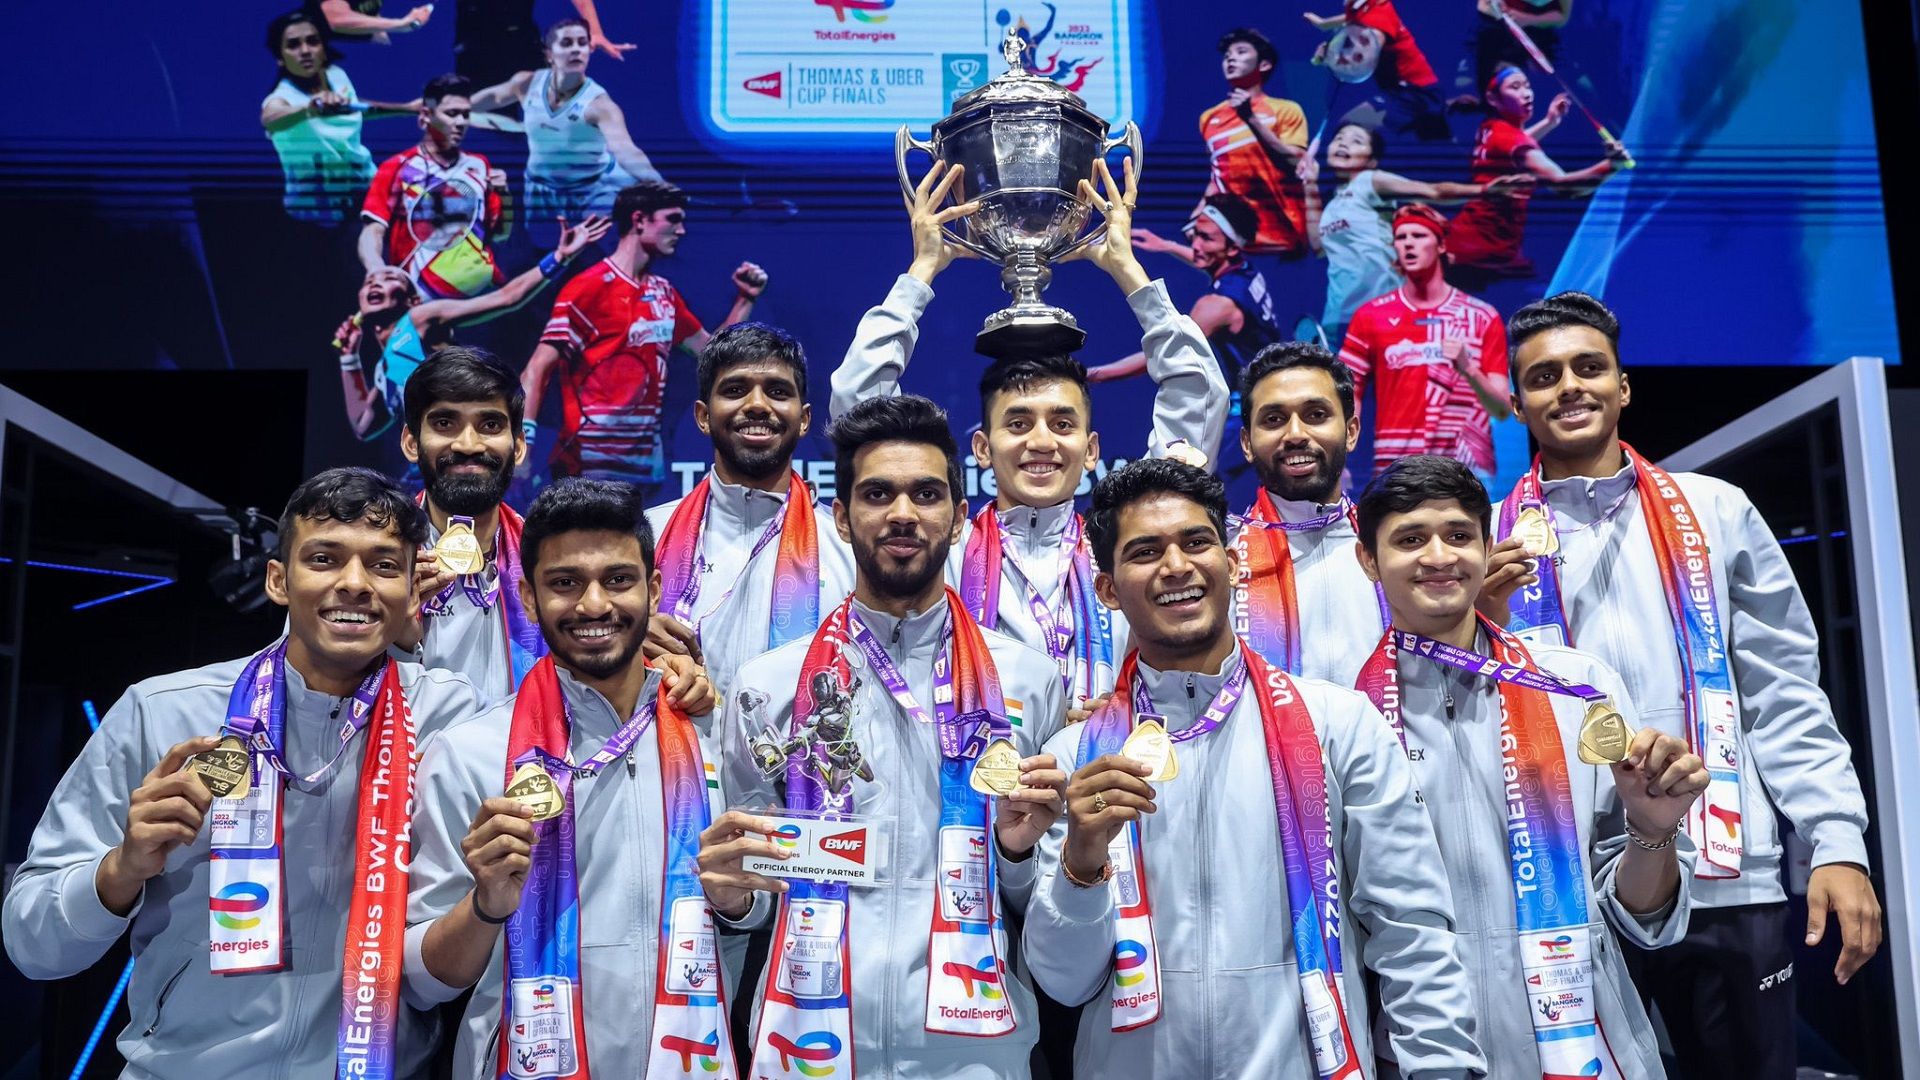 Thomas Cup Winners Heres everything we know about the champions